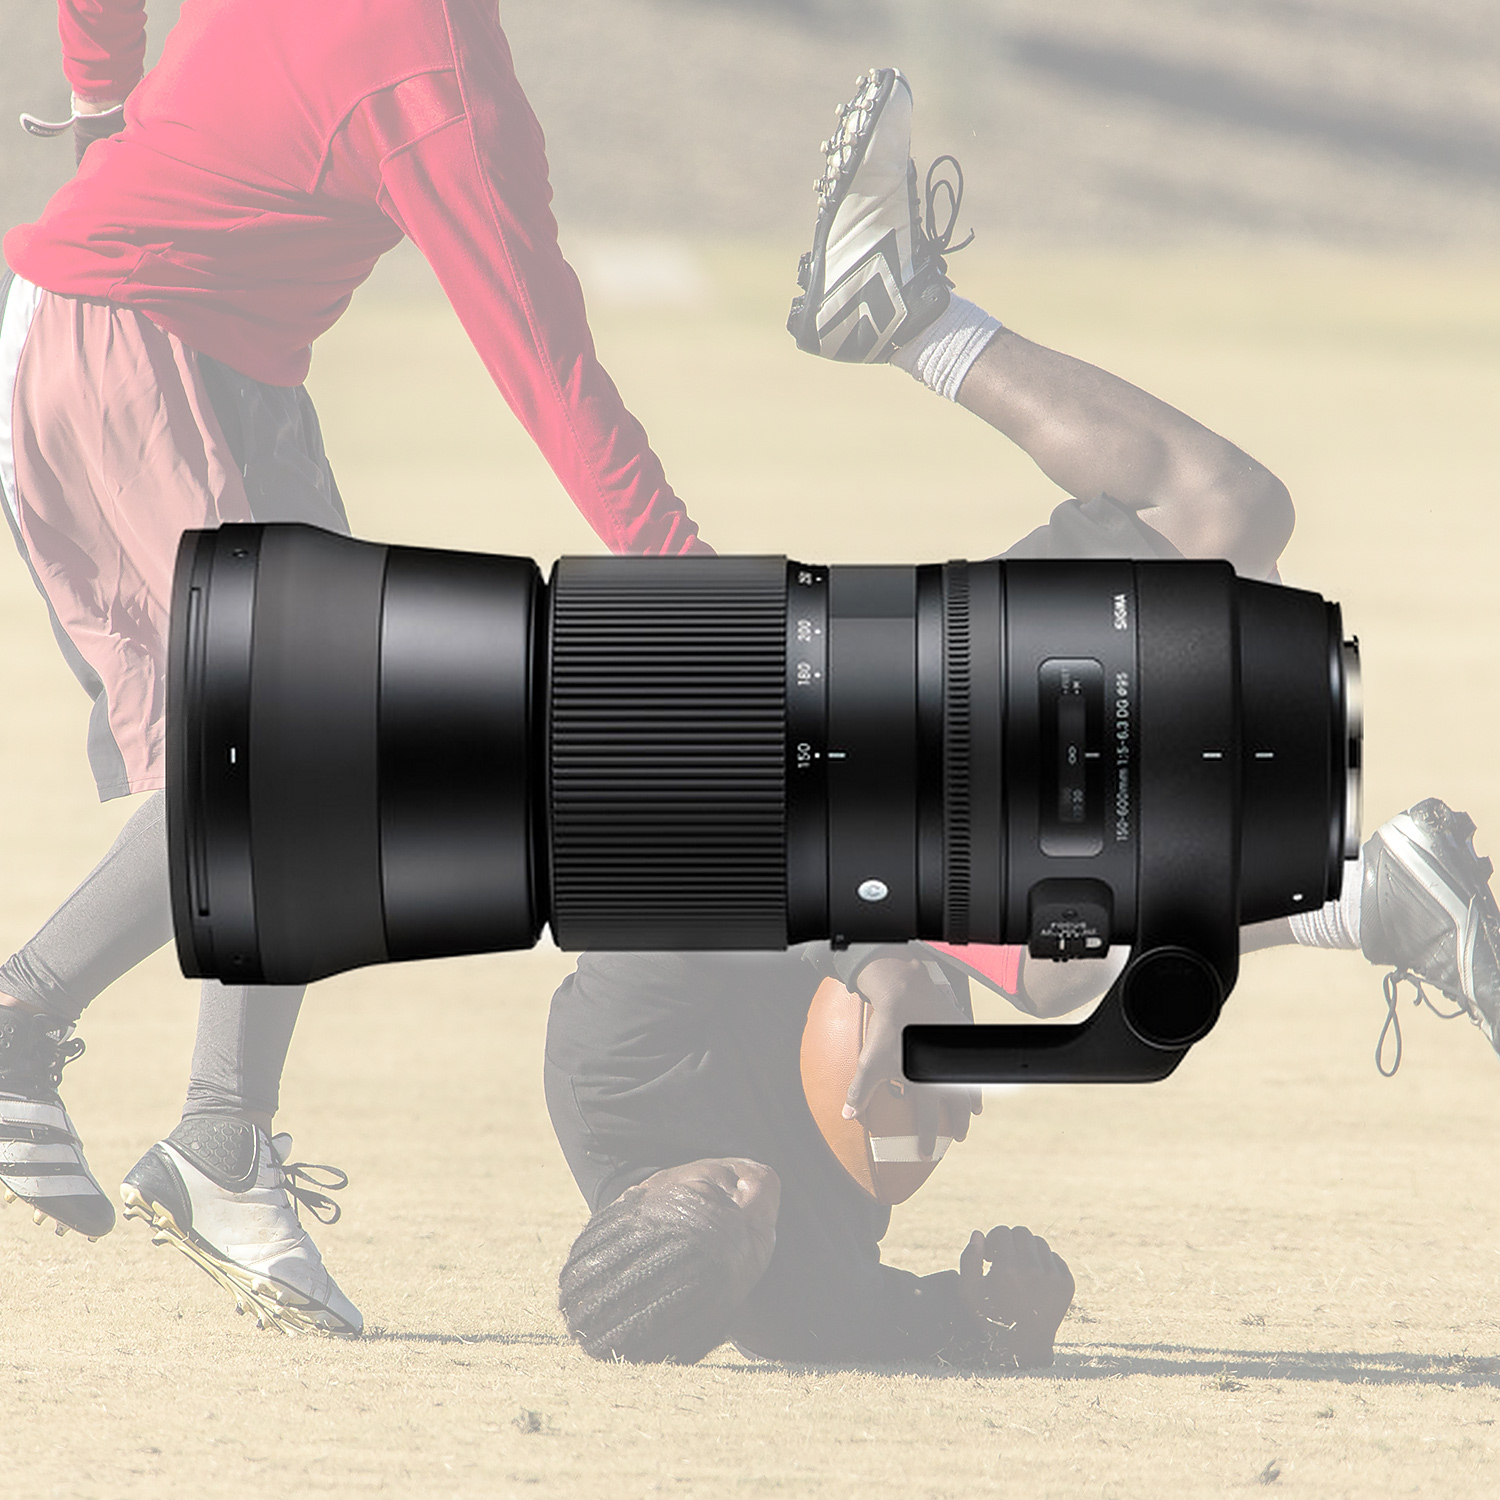 Review: Optically The Sigma 150-600mm Sports Lens Really Delivers